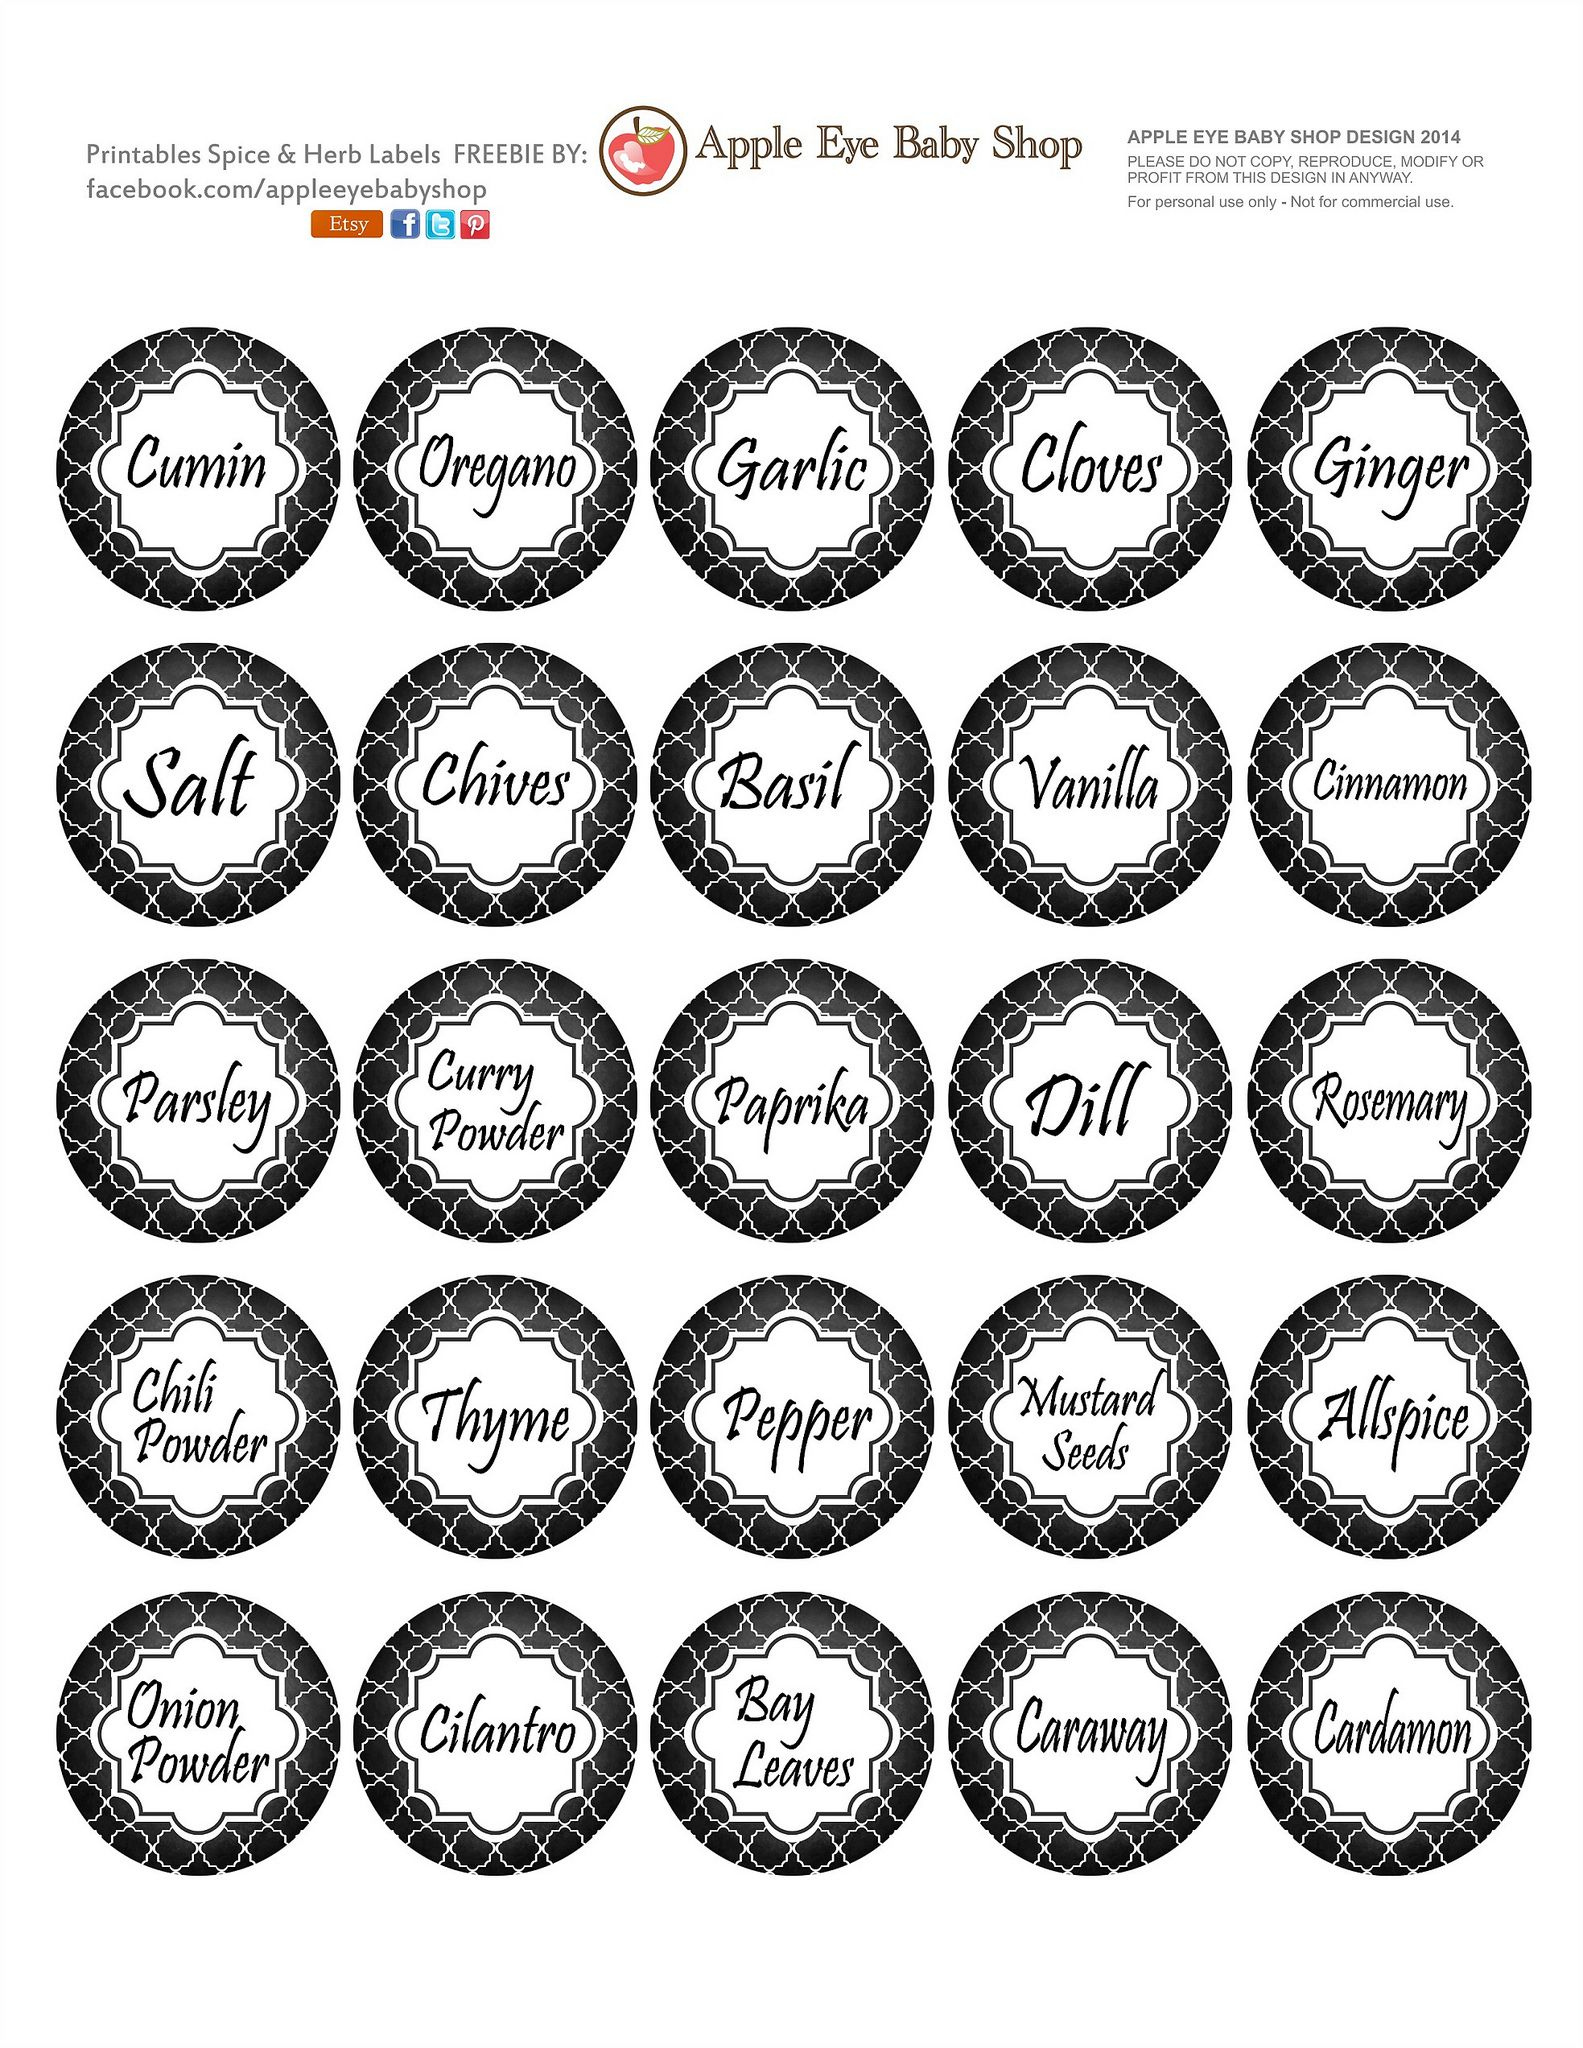 All Sizes FREE Printables Spice Herb Labels By Apple Eye Baby 